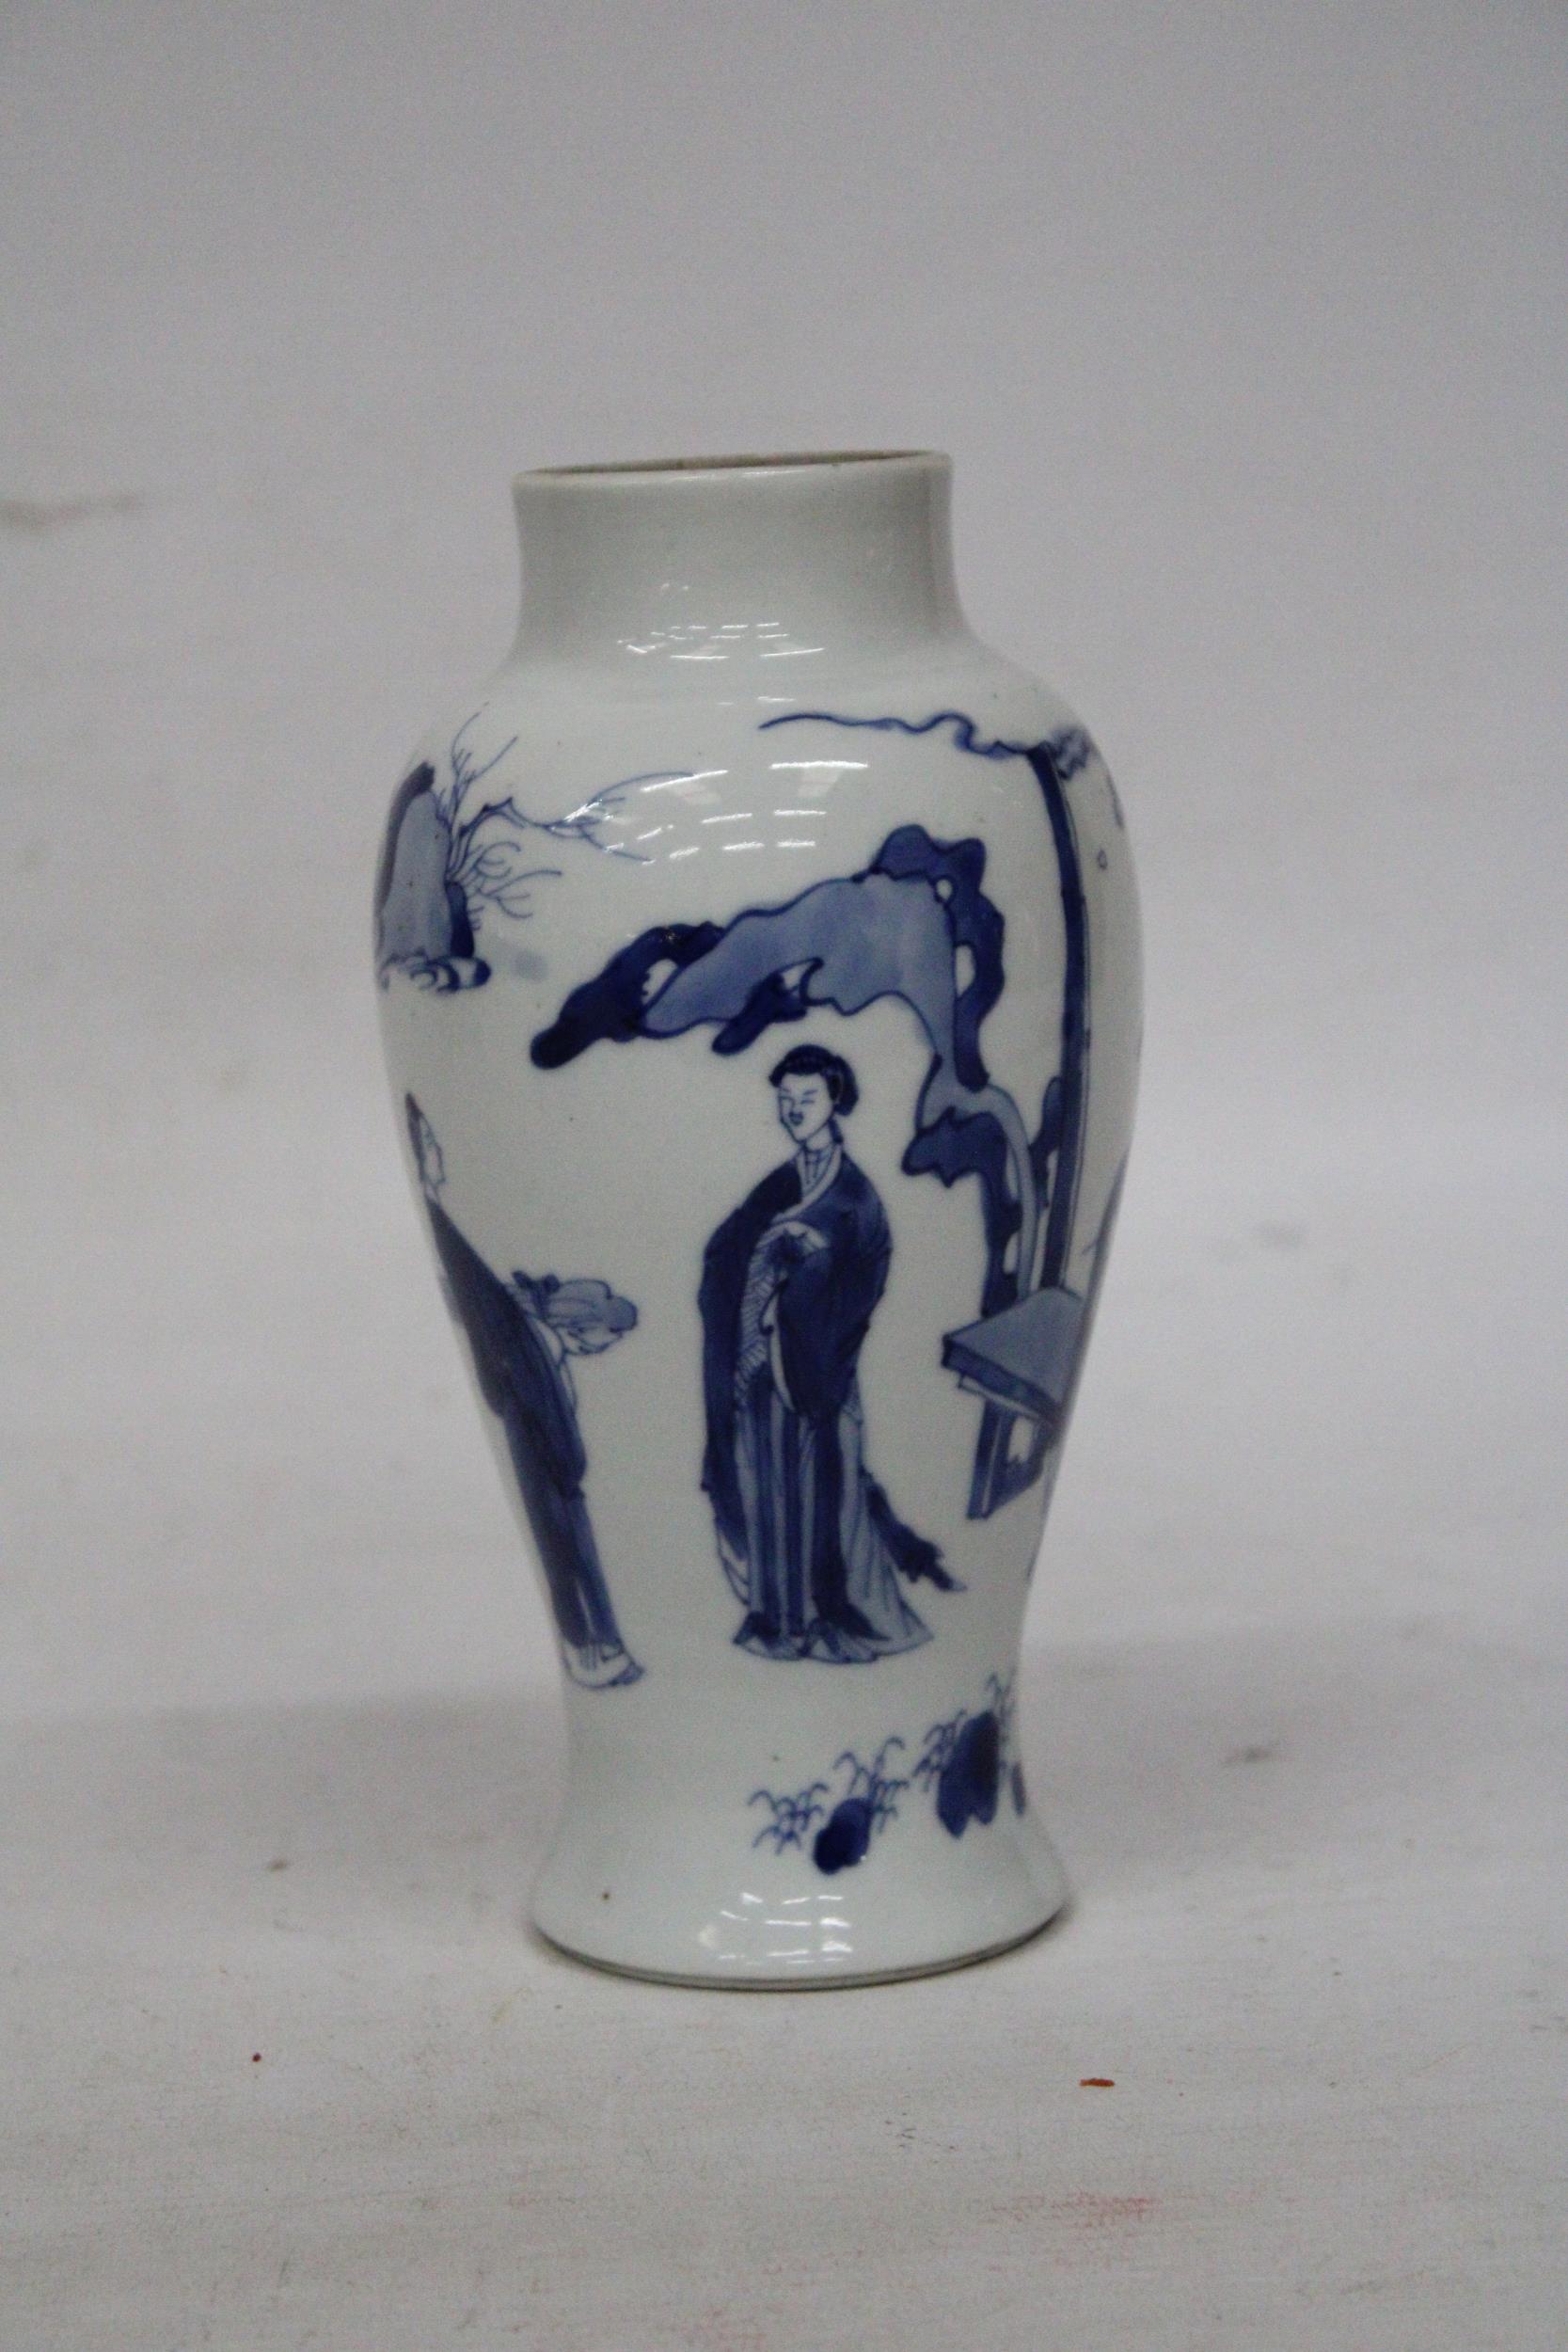 A CHINESE KANGXI PERIOD (1661 - 1722) BLUE AND WHITE PORCELAIN VASE HEIGHT 19CM - Image 4 of 7